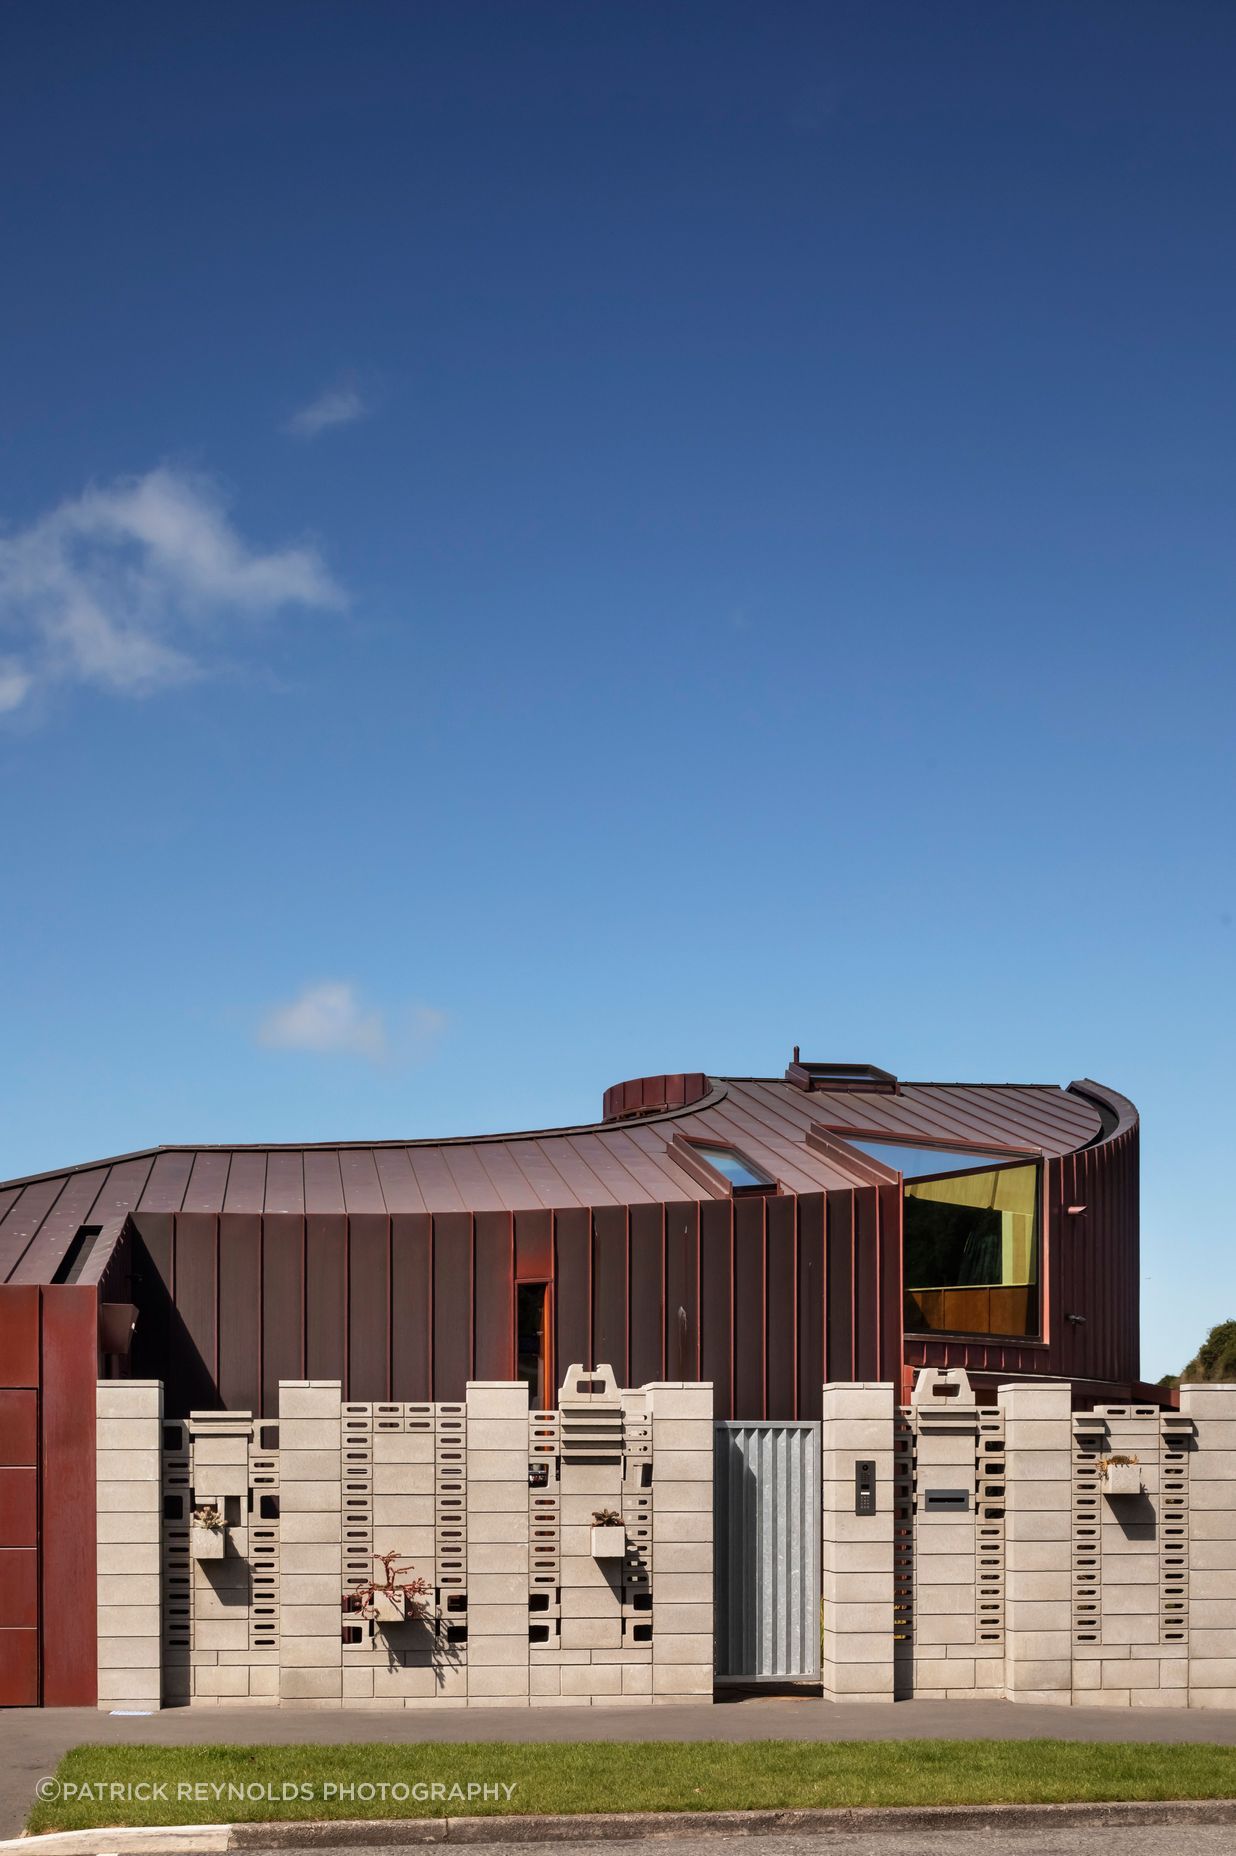 The new-build home in Lyttelton is completely clad in copper. “We worked with The Architectural Roofing Company in Christchurch to come up with detailing and ways to make that work,” says Brad Bonnington of Bull O’Sullivan Architecture.